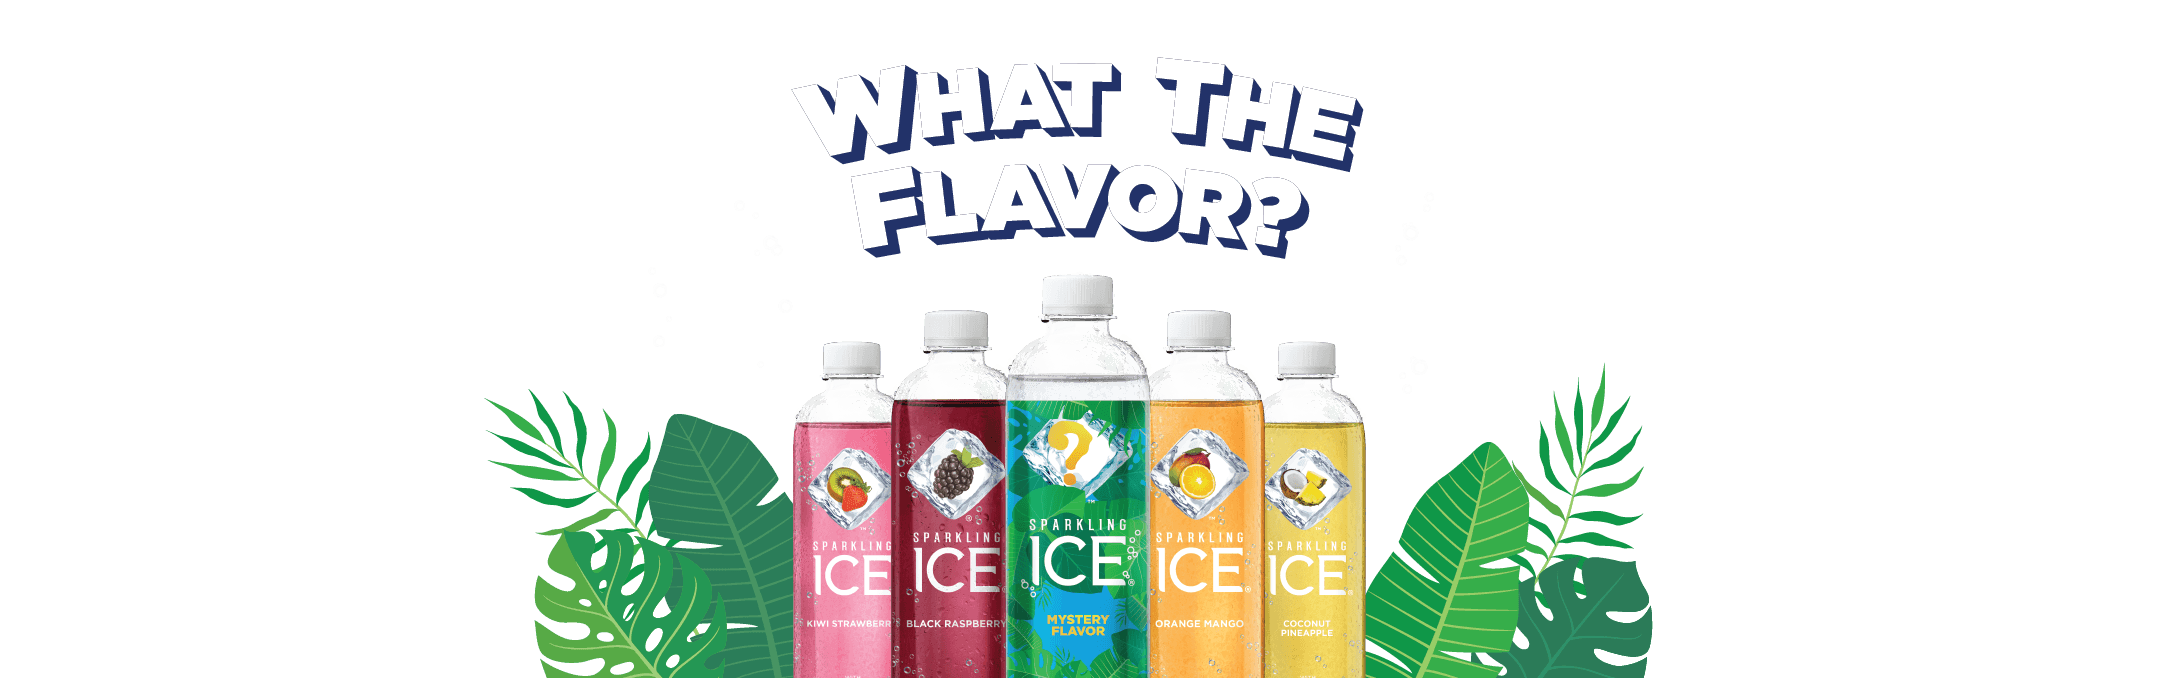 ~Sparkling Ice.. Mystery FLAVOR!